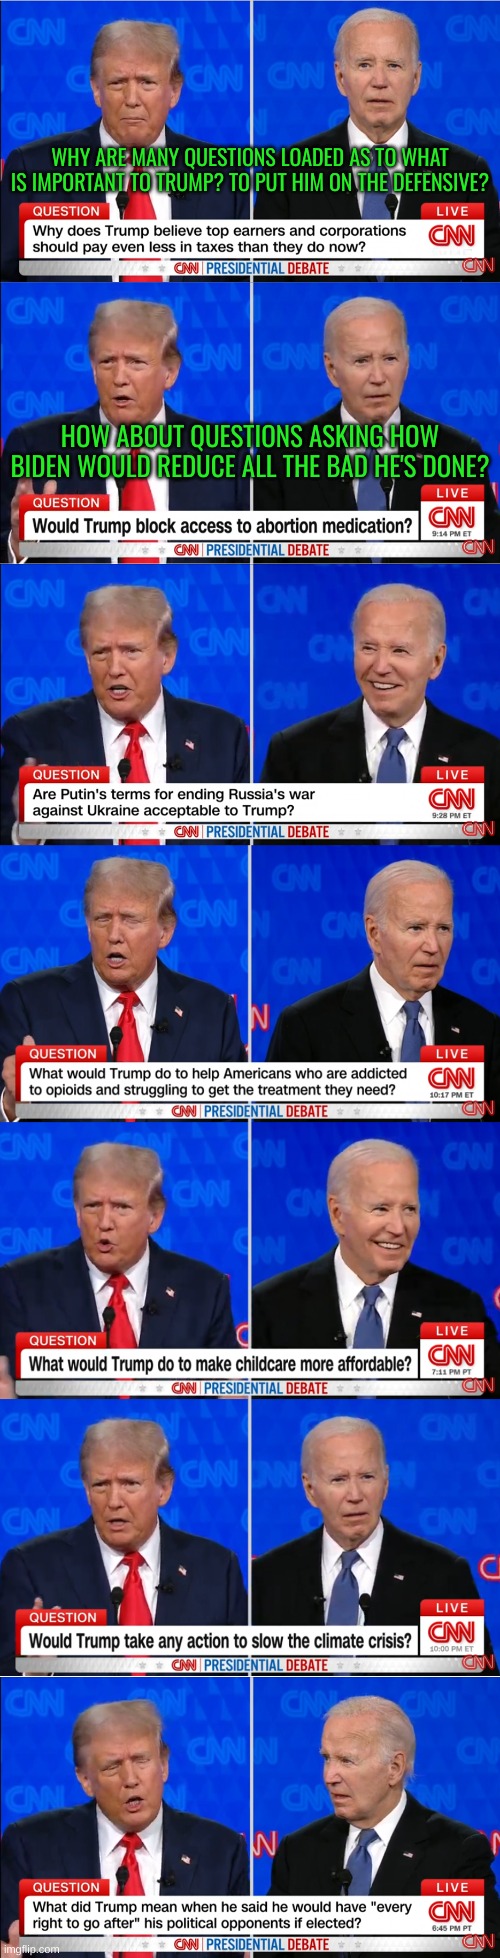 Loaded Questions galore. Why does CNN have to ask what concerns Trump but not Biden? | WHY ARE MANY QUESTIONS LOADED AS TO WHAT IS IMPORTANT TO TRUMP? TO PUT HIM ON THE DEFENSIVE? HOW ABOUT QUESTIONS ASKING HOW BIDEN WOULD REDUCE ALL THE BAD HE'S DONE? | made w/ Imgflip meme maker